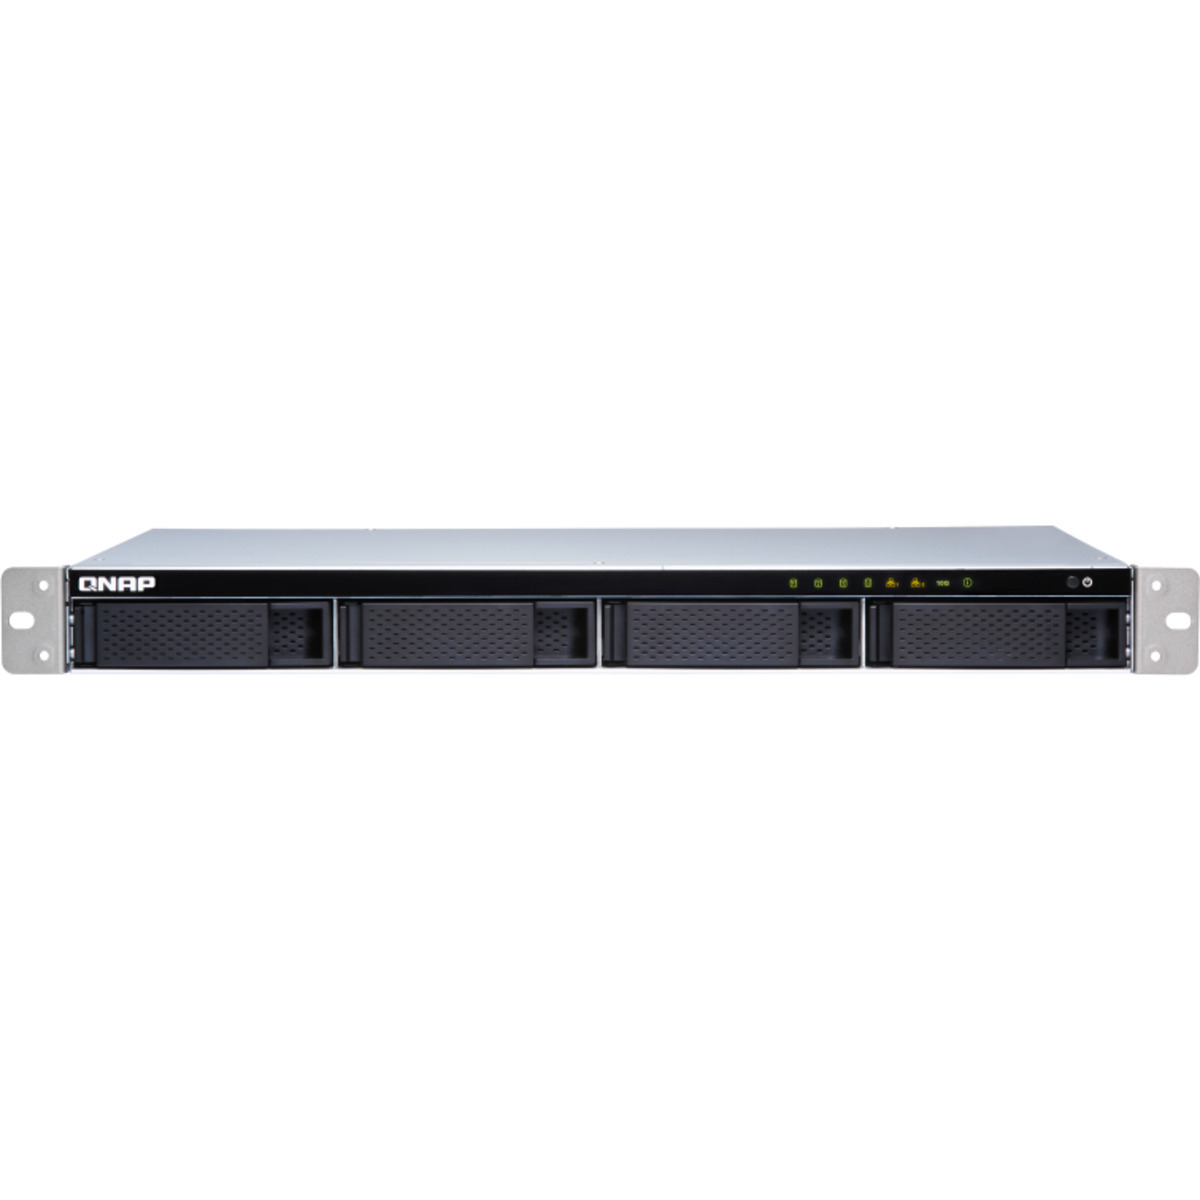 QNAP TS-431XeU 12tb 4-Bay RackMount Multimedia / Power User / Business NAS - Network Attached Storage Device 2x6tb Seagate IronWolf ST6000VN006 3.5 5400rpm SATA 6Gb/s HDD NAS Class Drives Installed - Burn-In Tested - FREE RAM UPGRADE TS-431XeU